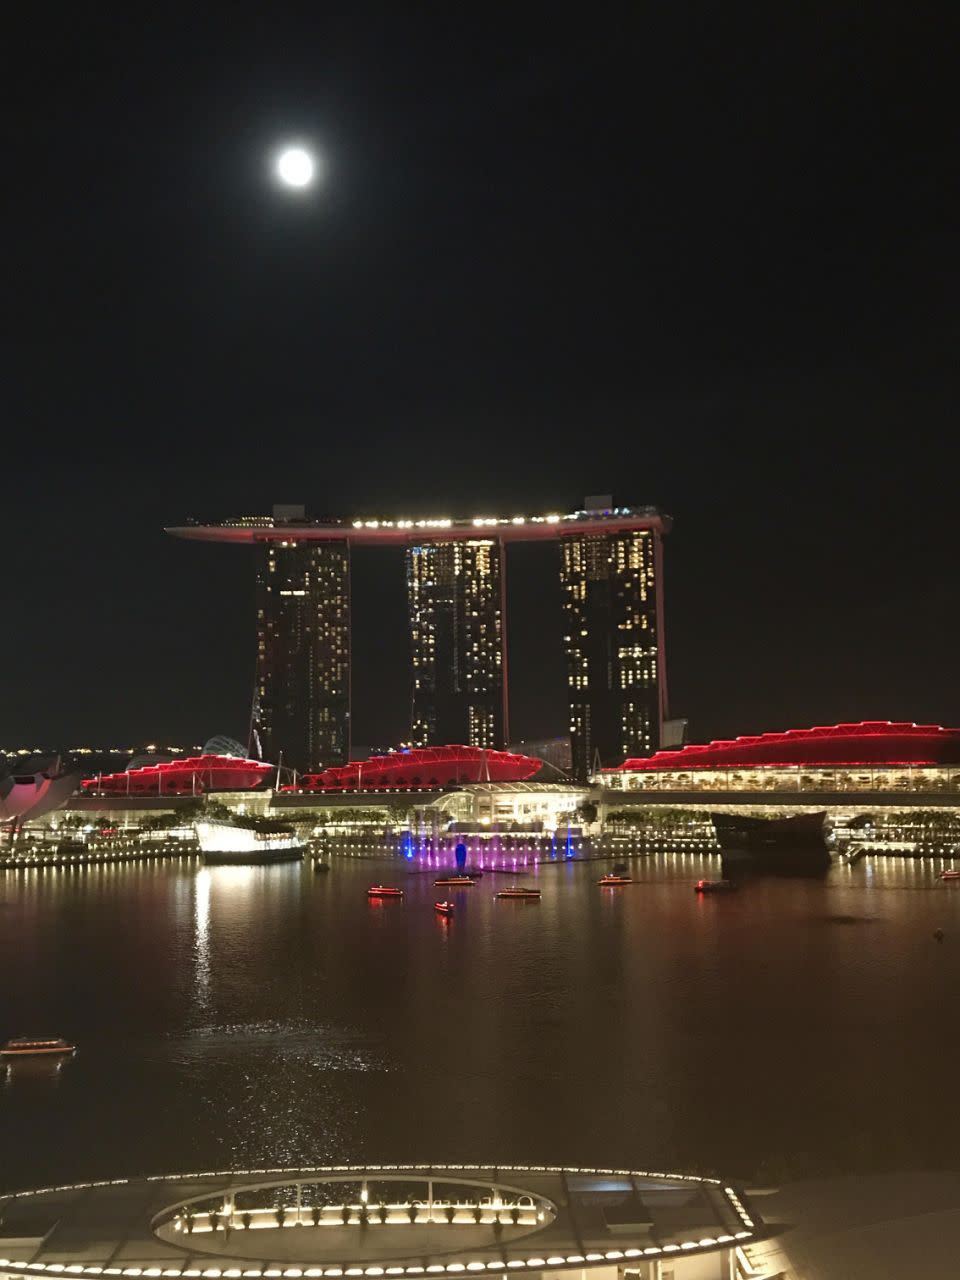 The Lighthouse Rooftop Bar has a spectacular view of the Marina Bay light show.